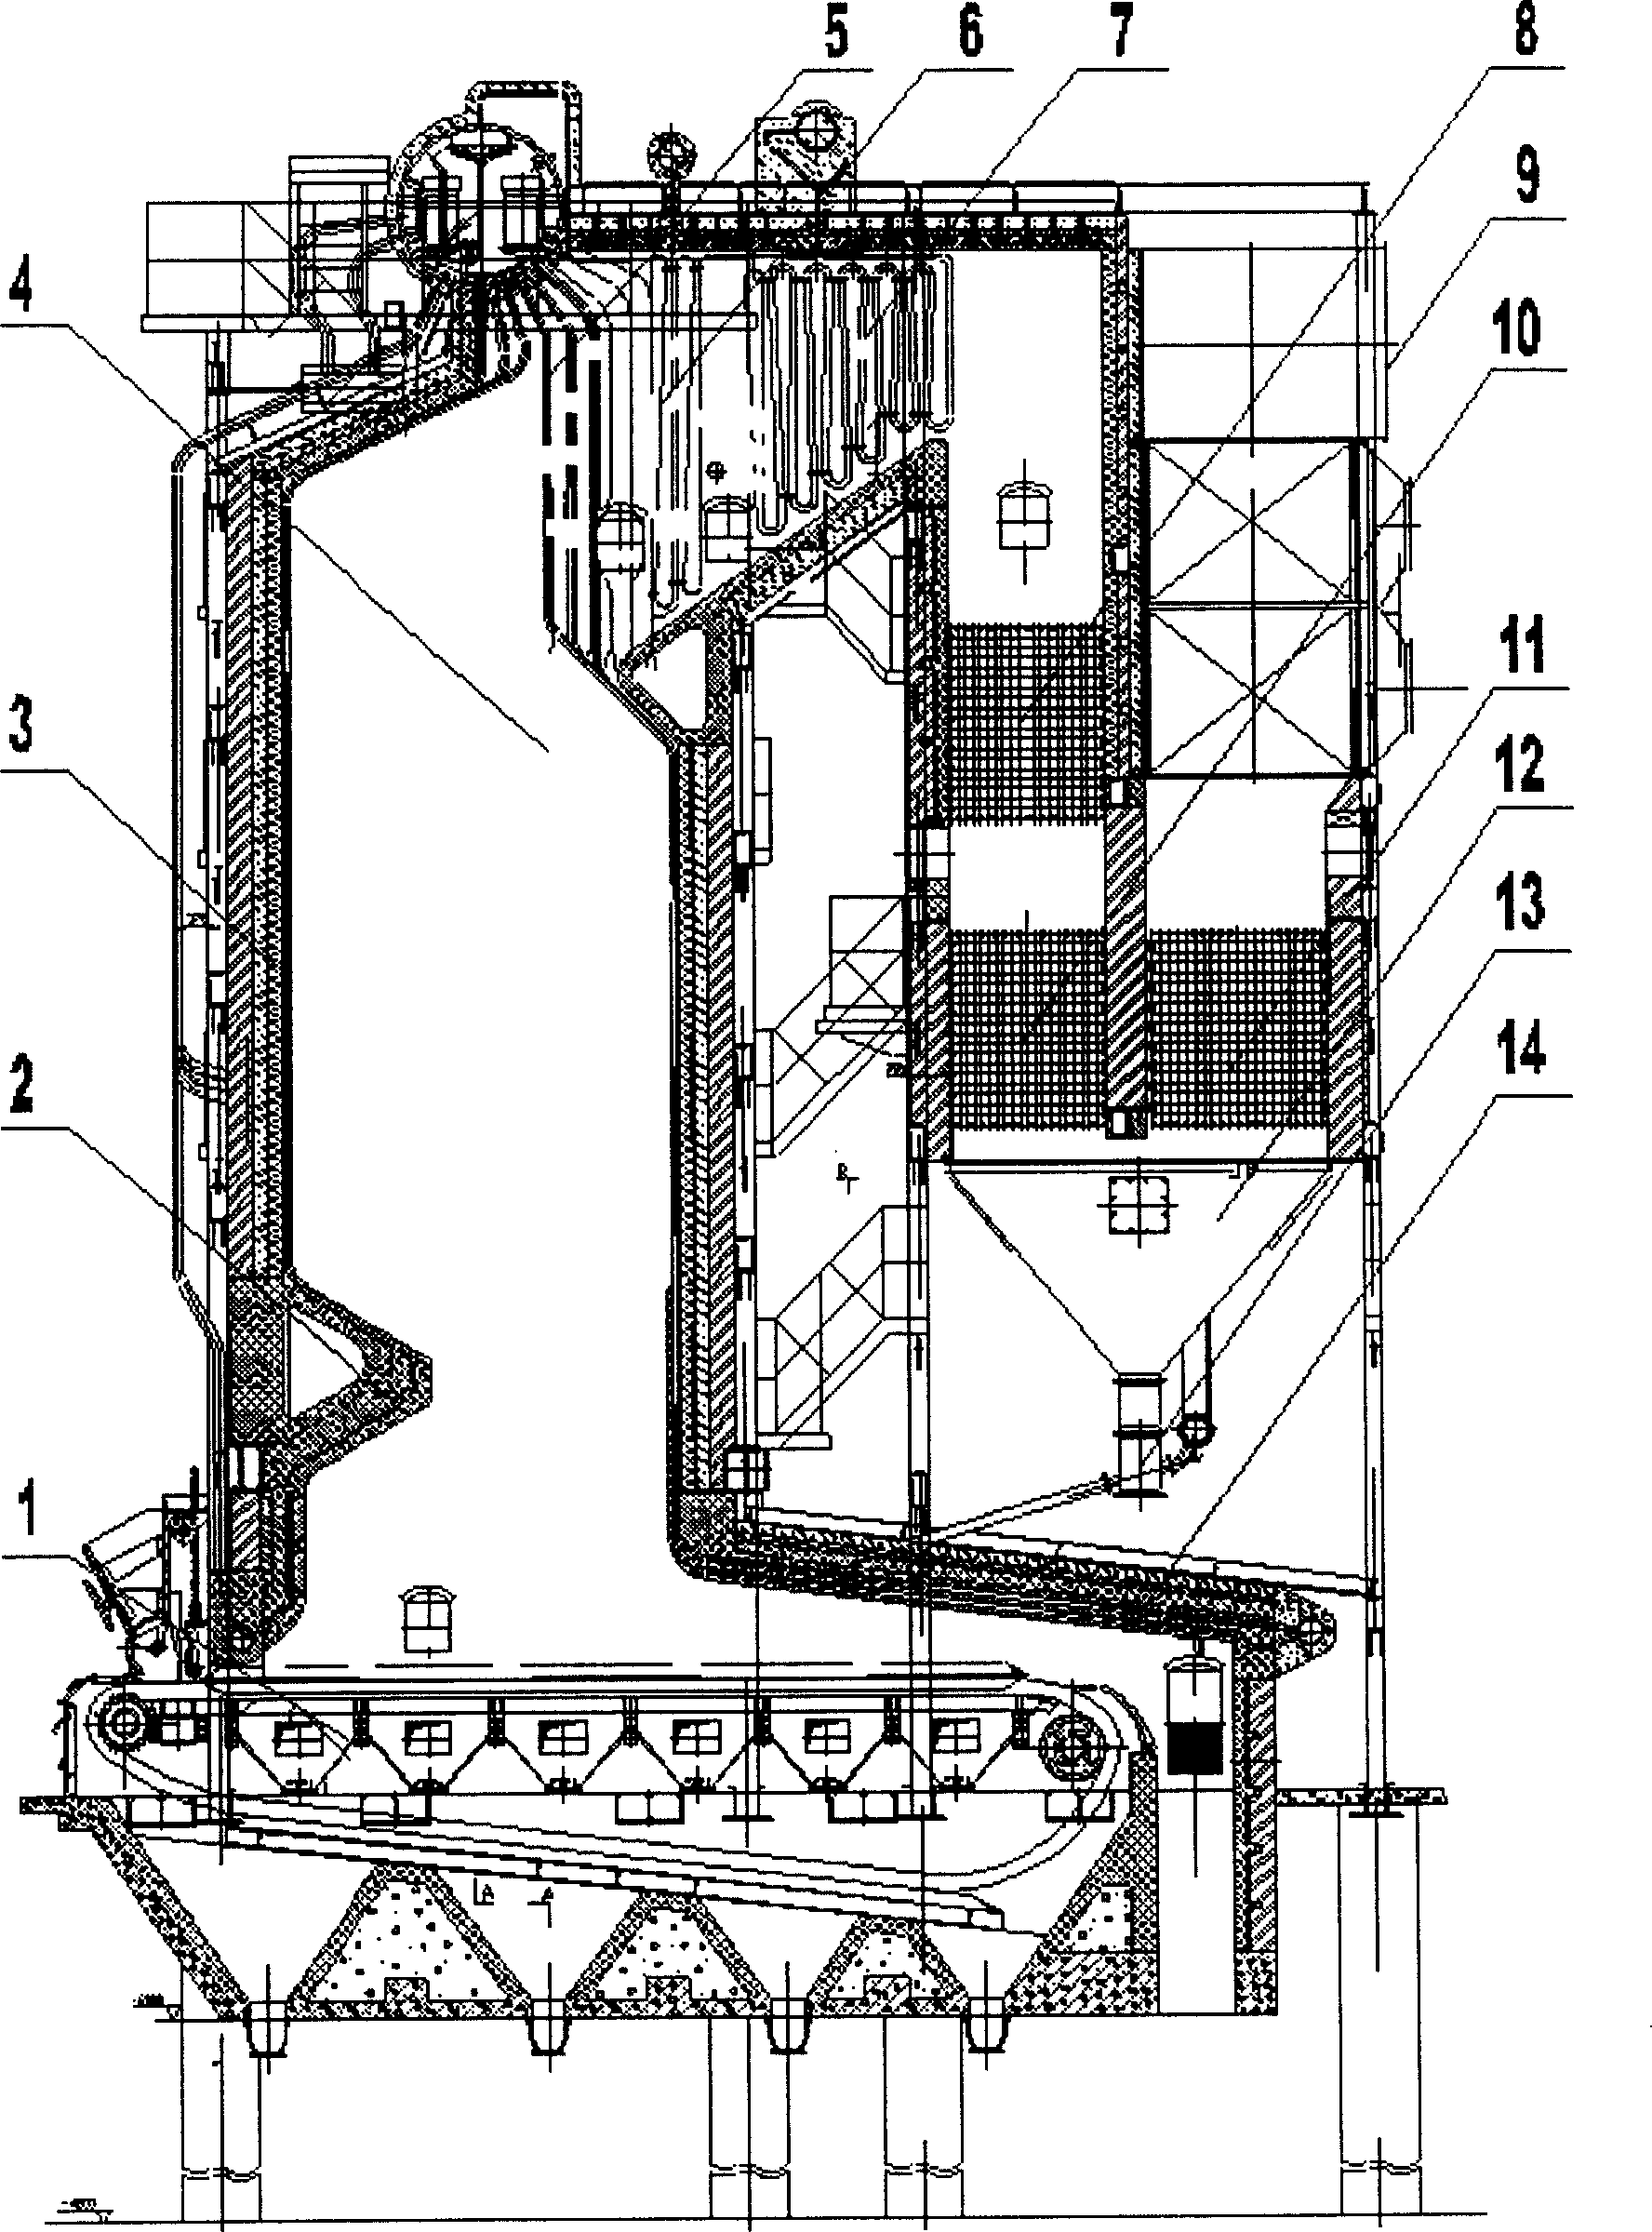 Internally circulating fluidized reburning device for fly ash based on high temperature separation